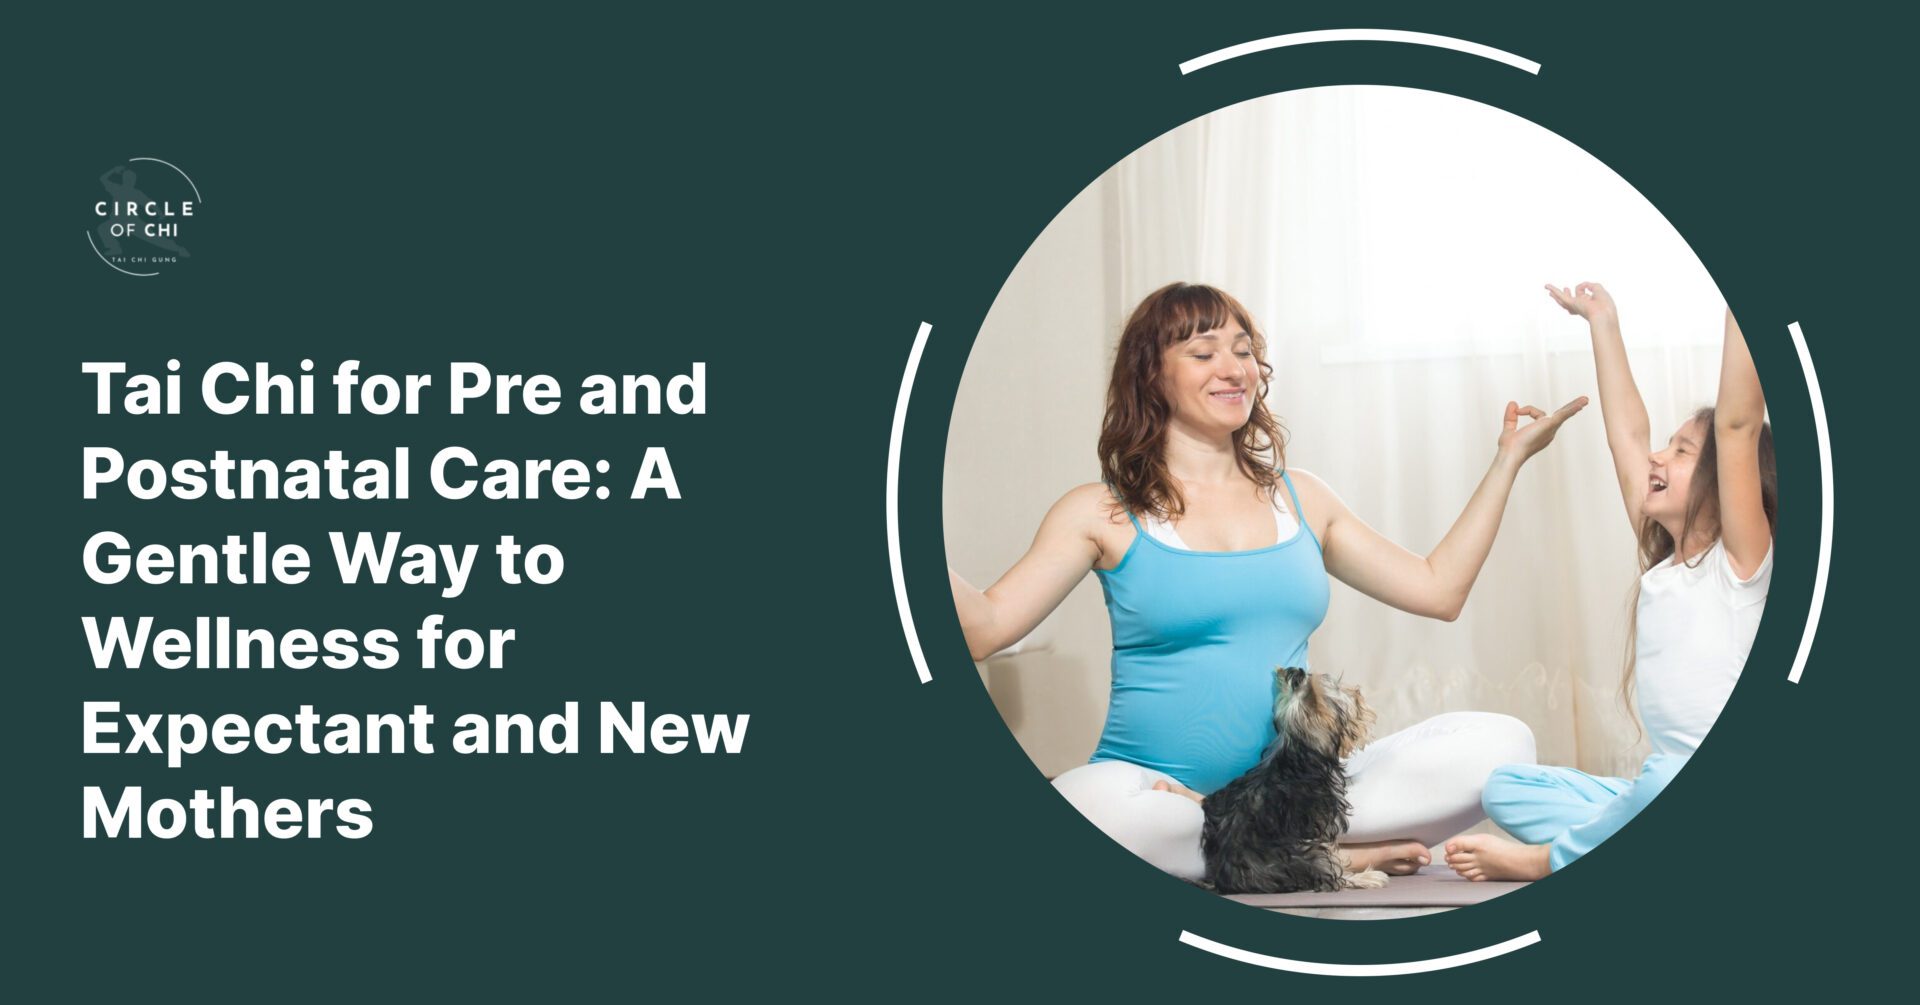 Tai Chi for Pre and Postnatal Care: A Gentle Way to Wellness for Expectant and New Mothers